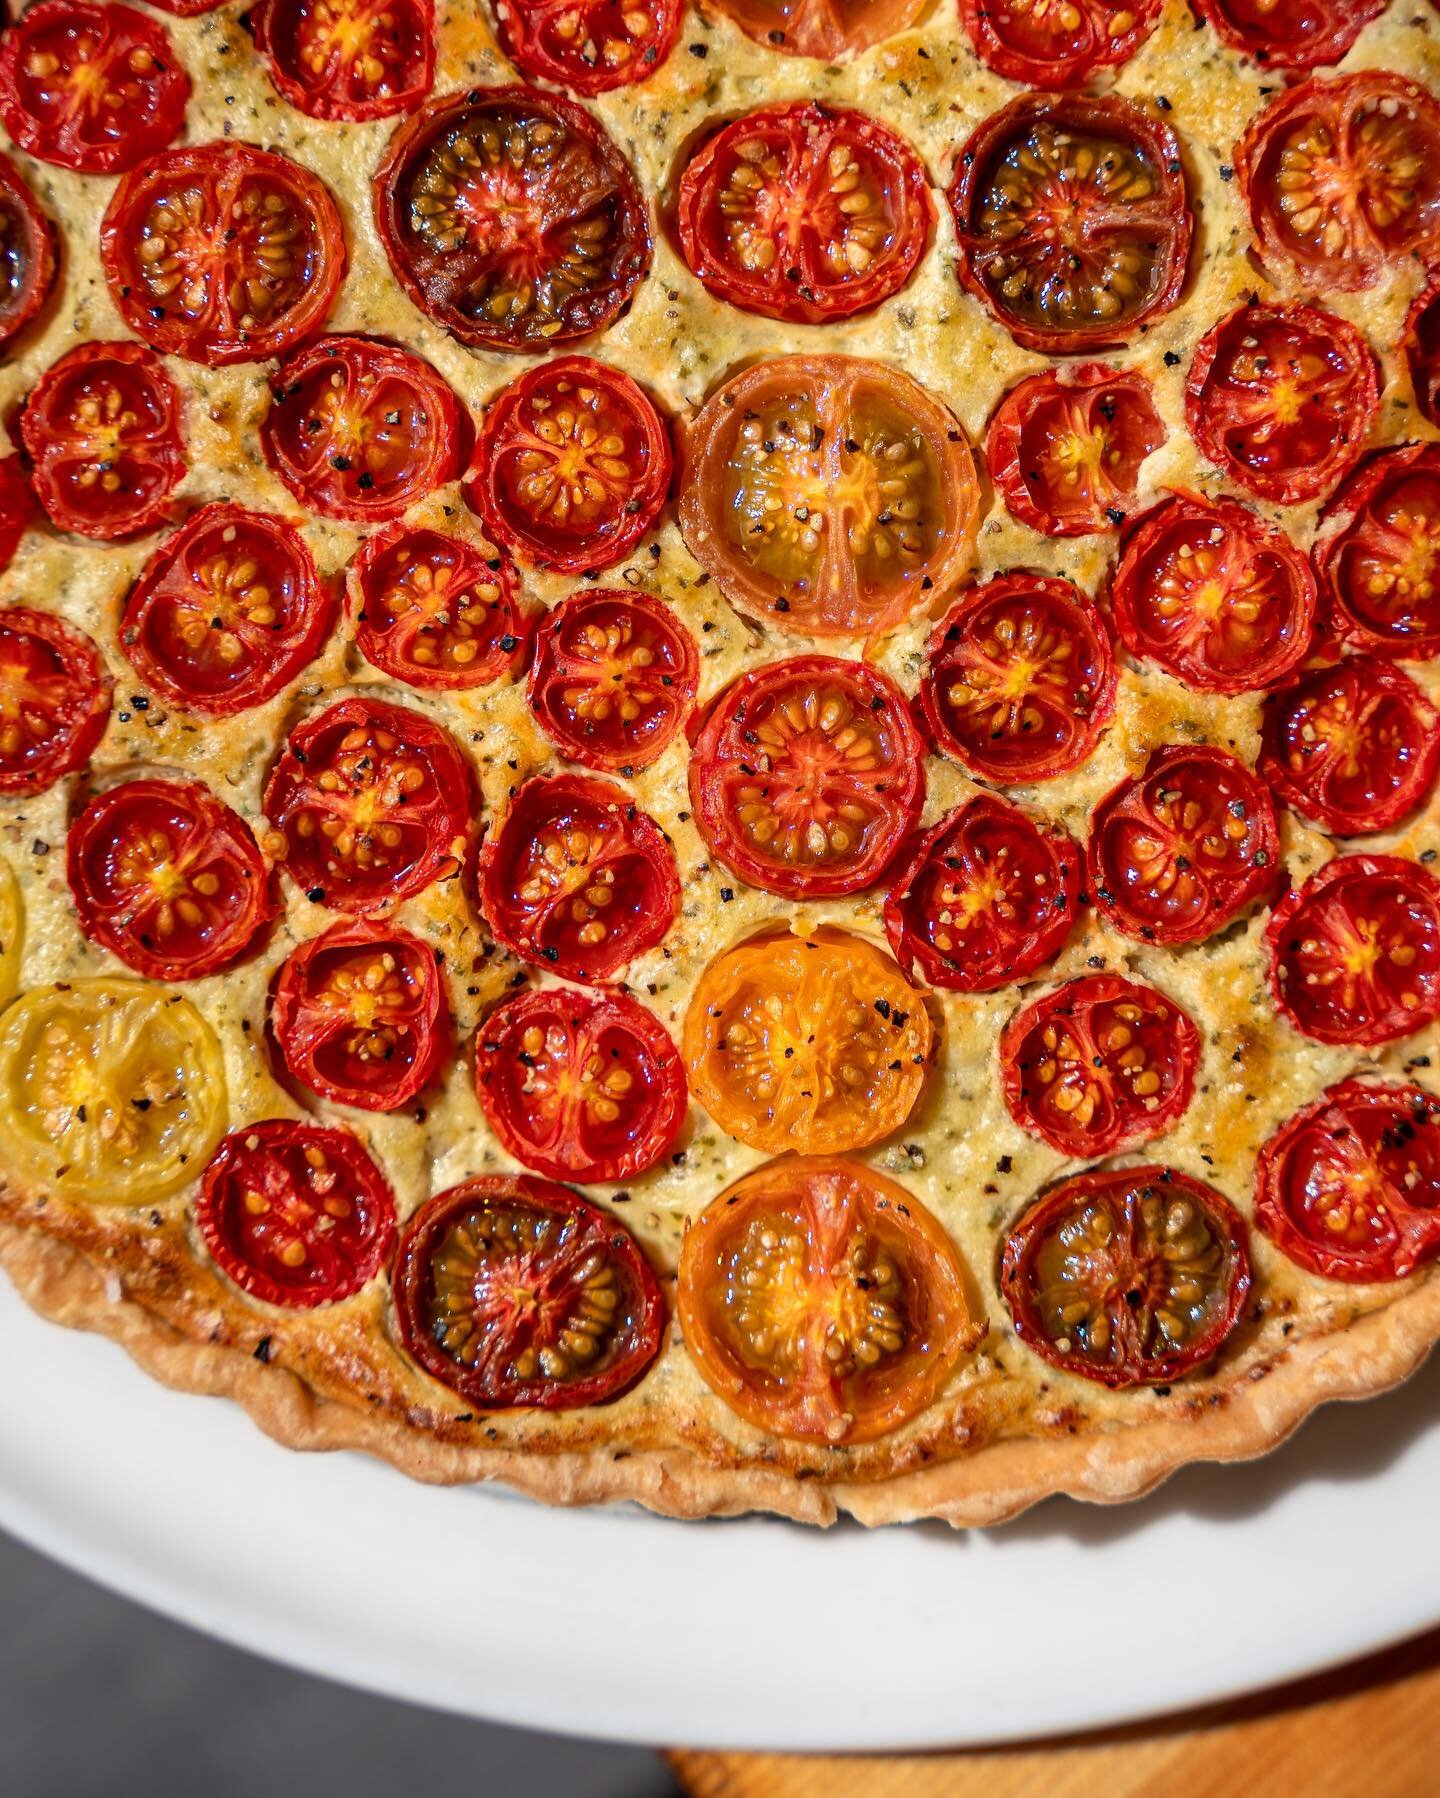 It's BACK. Tomato season is in full effect and we're so excited to be able to bake our beloved Tomato Tarts once again!
Heirloom tomatoes, parmesan, roasted garlic, cream cheese, and basil on a delicious savory crust!

Come get yourself some slices w